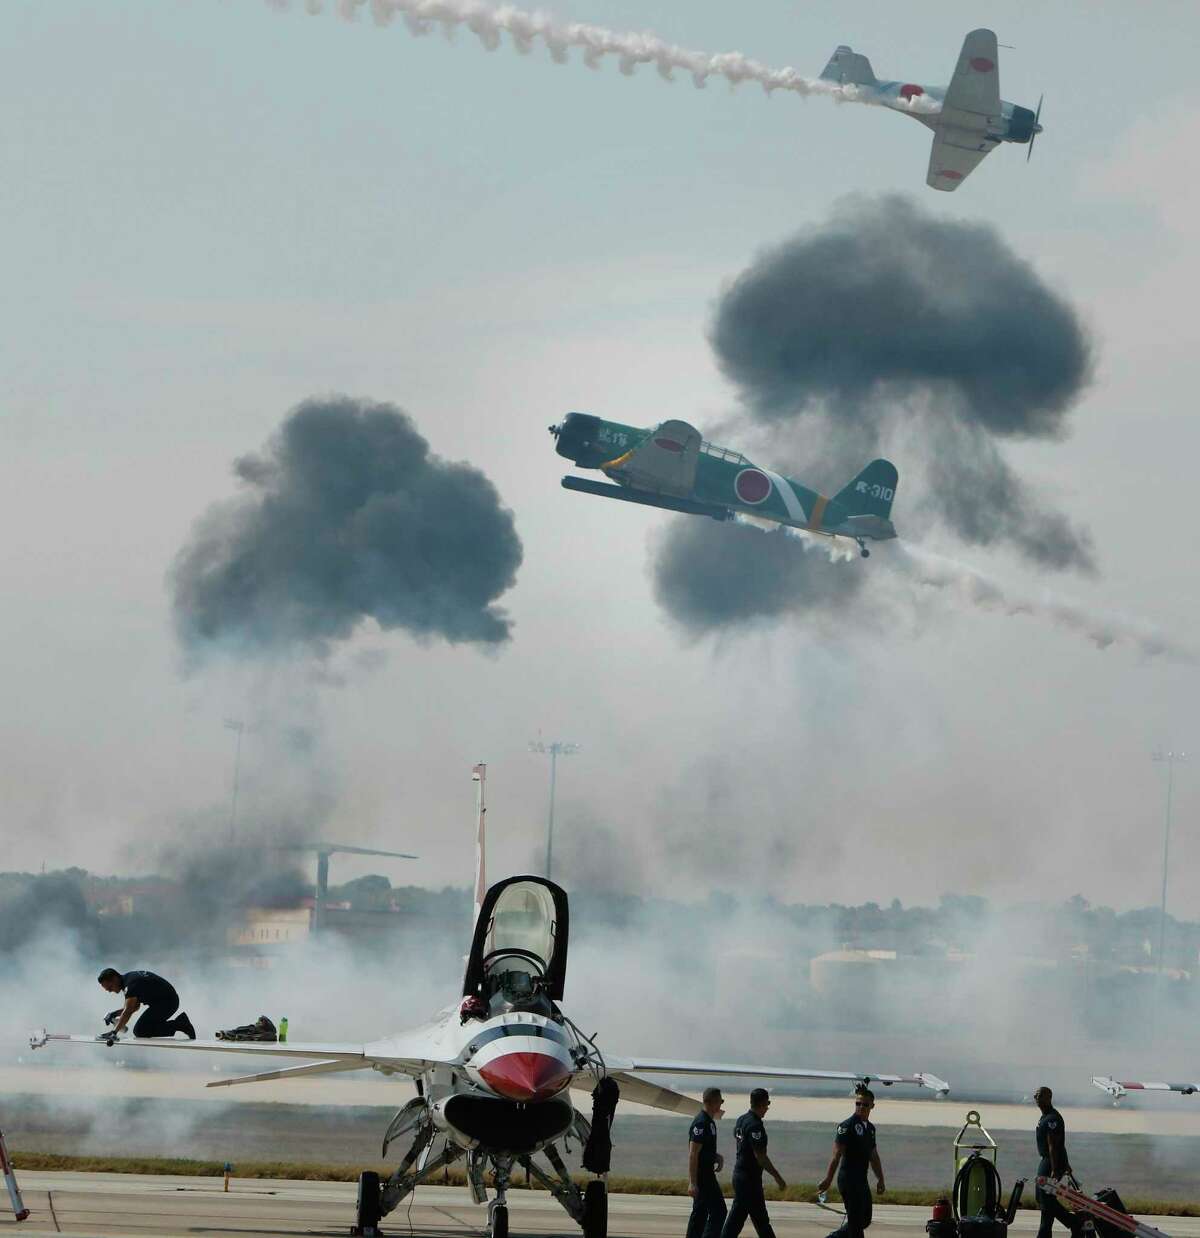 The Pearl Harbor re-enactment at Joint Base San Antonio's Air Show and Open House in 2017 at Port San Antonio.